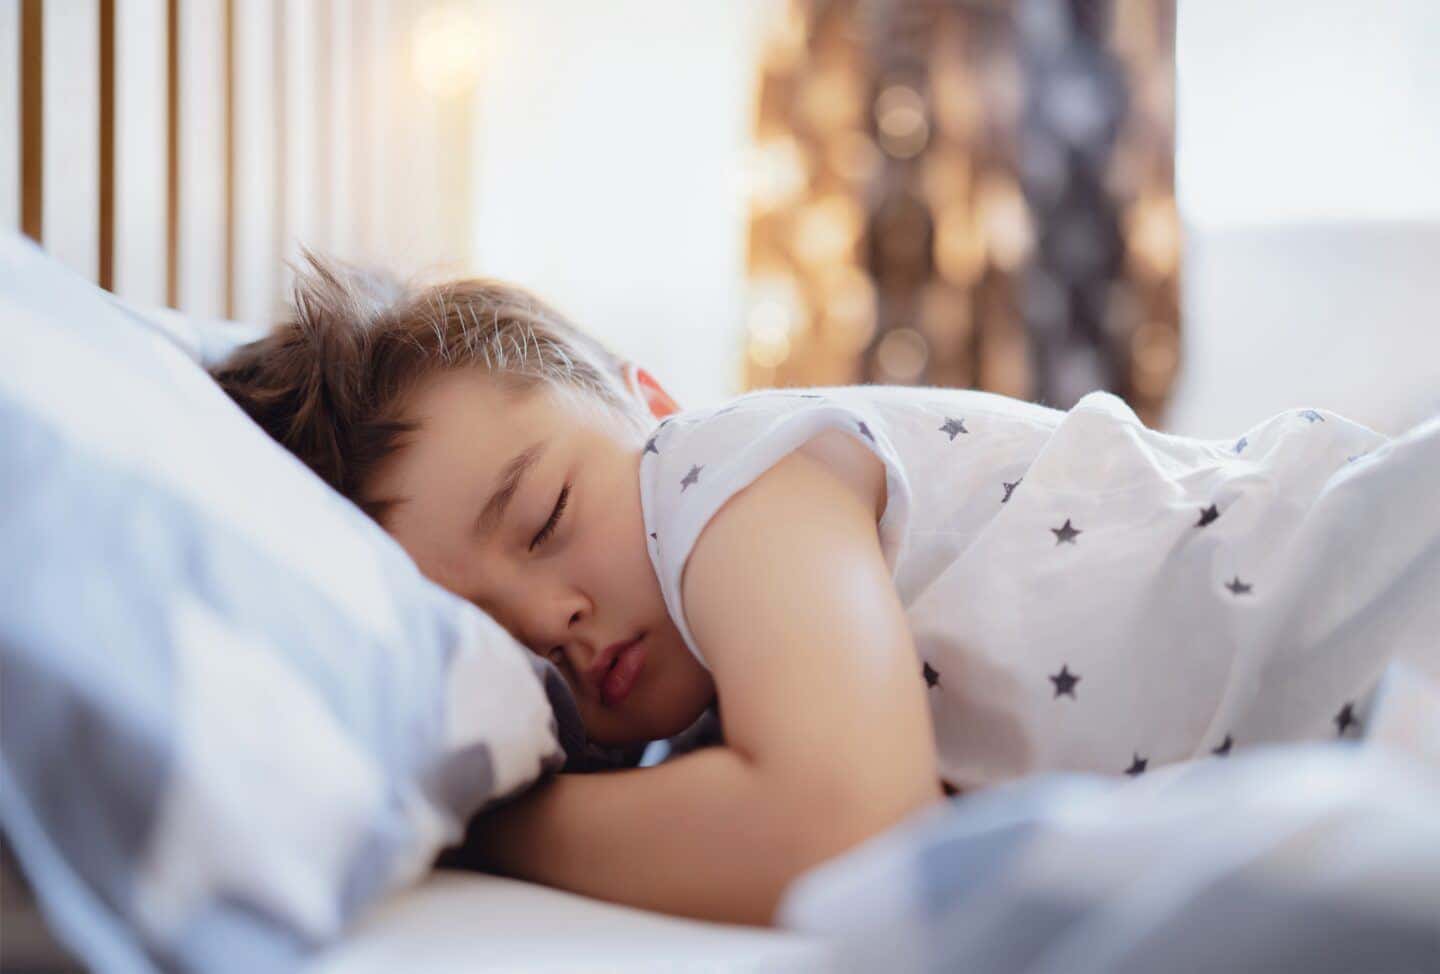 cute-boy-sleeping-on-bed-with-morning-light-lovely-child-get-deep-sleep-while-taking-a-nap-kid-relax_t20_A3QPnr-1440x974.jpg